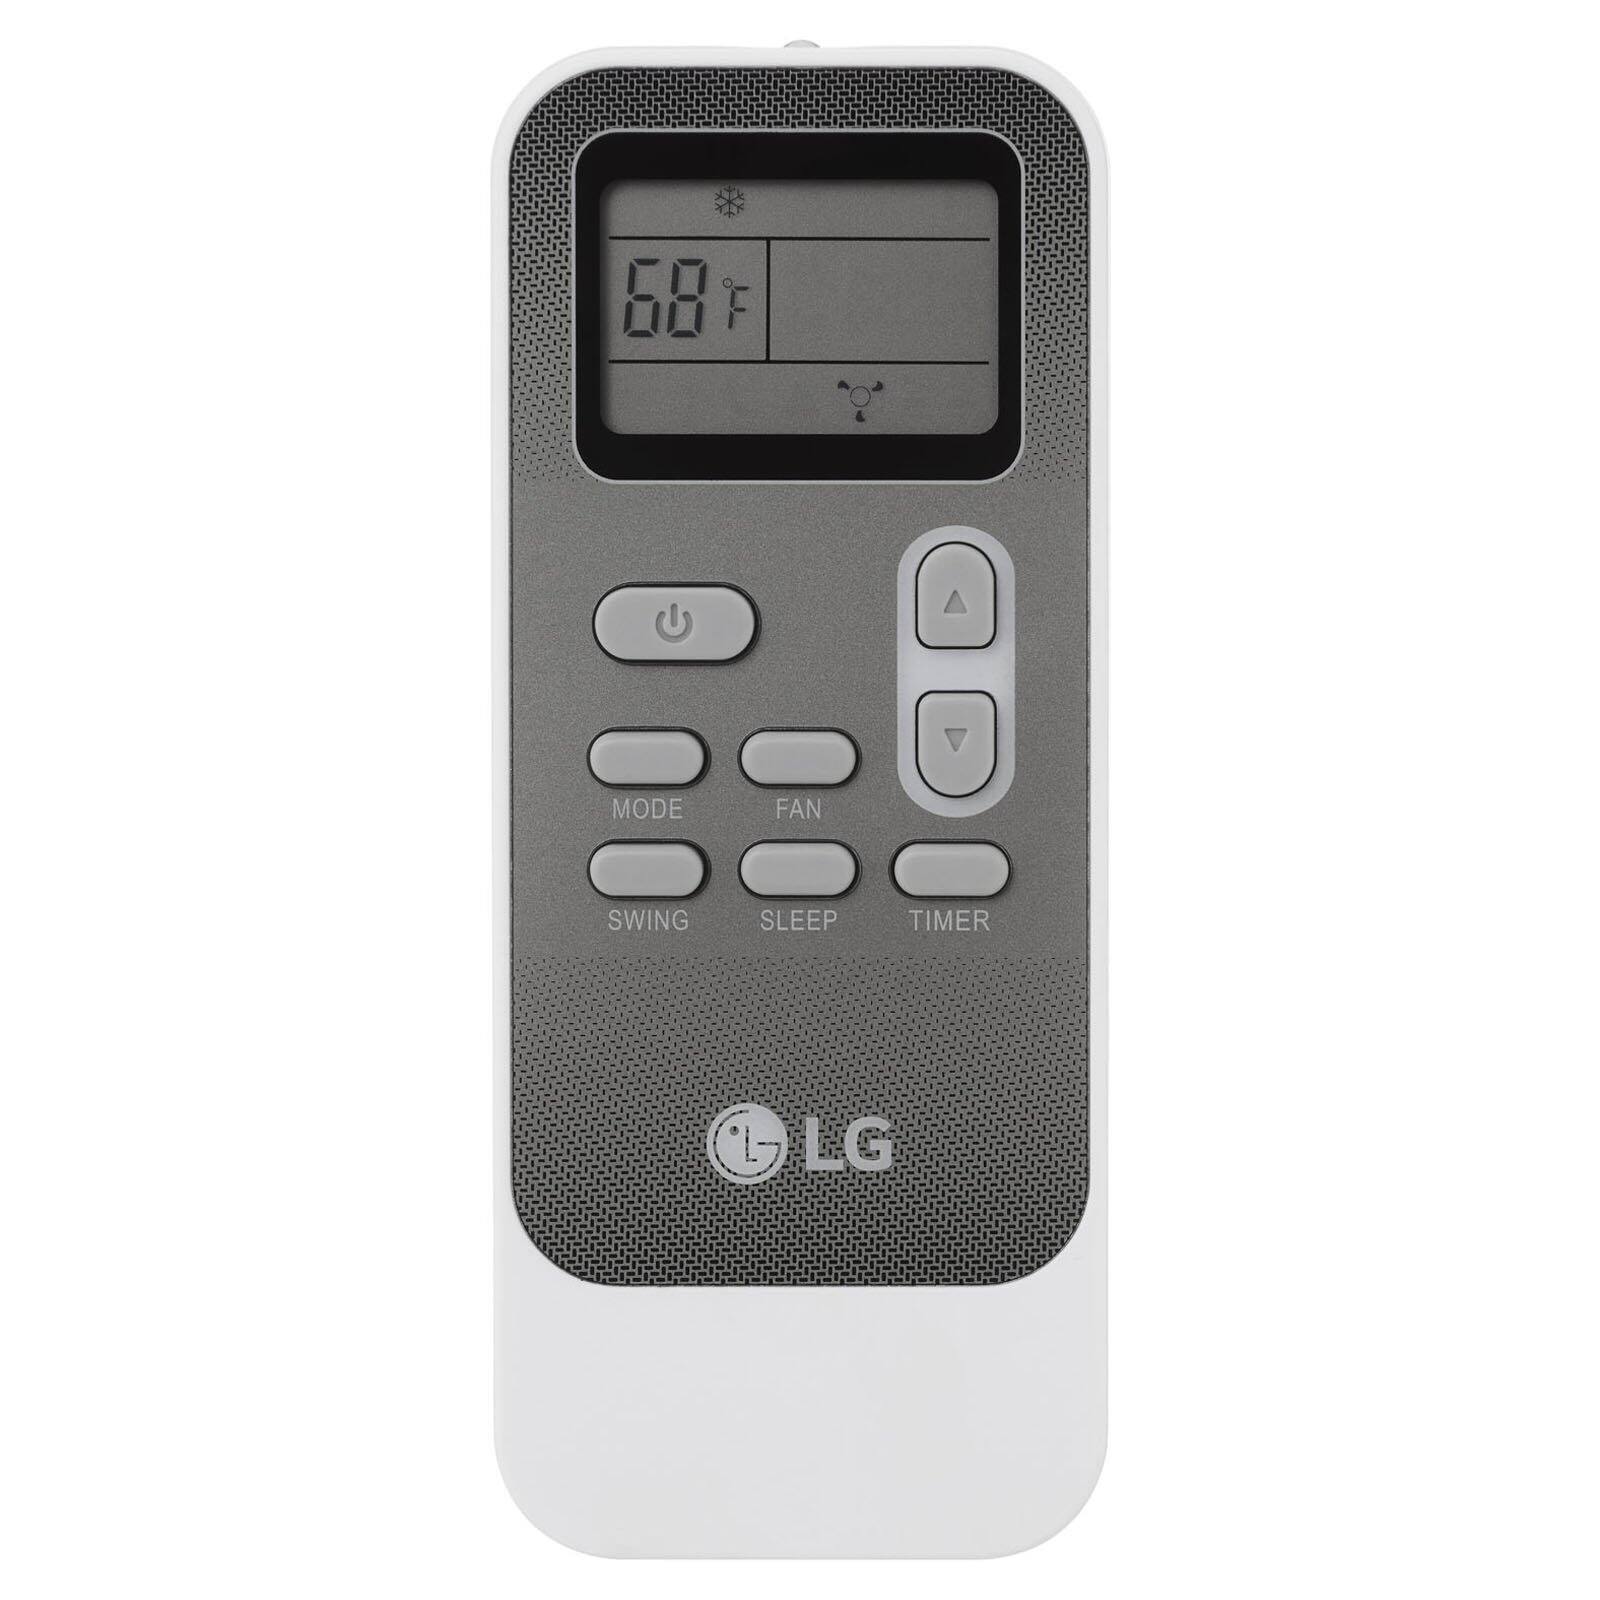 LG 115V Portable Air Conditioner with Remote Control in White for Rooms up to 200 Sq. Ft. - image 2 of 7